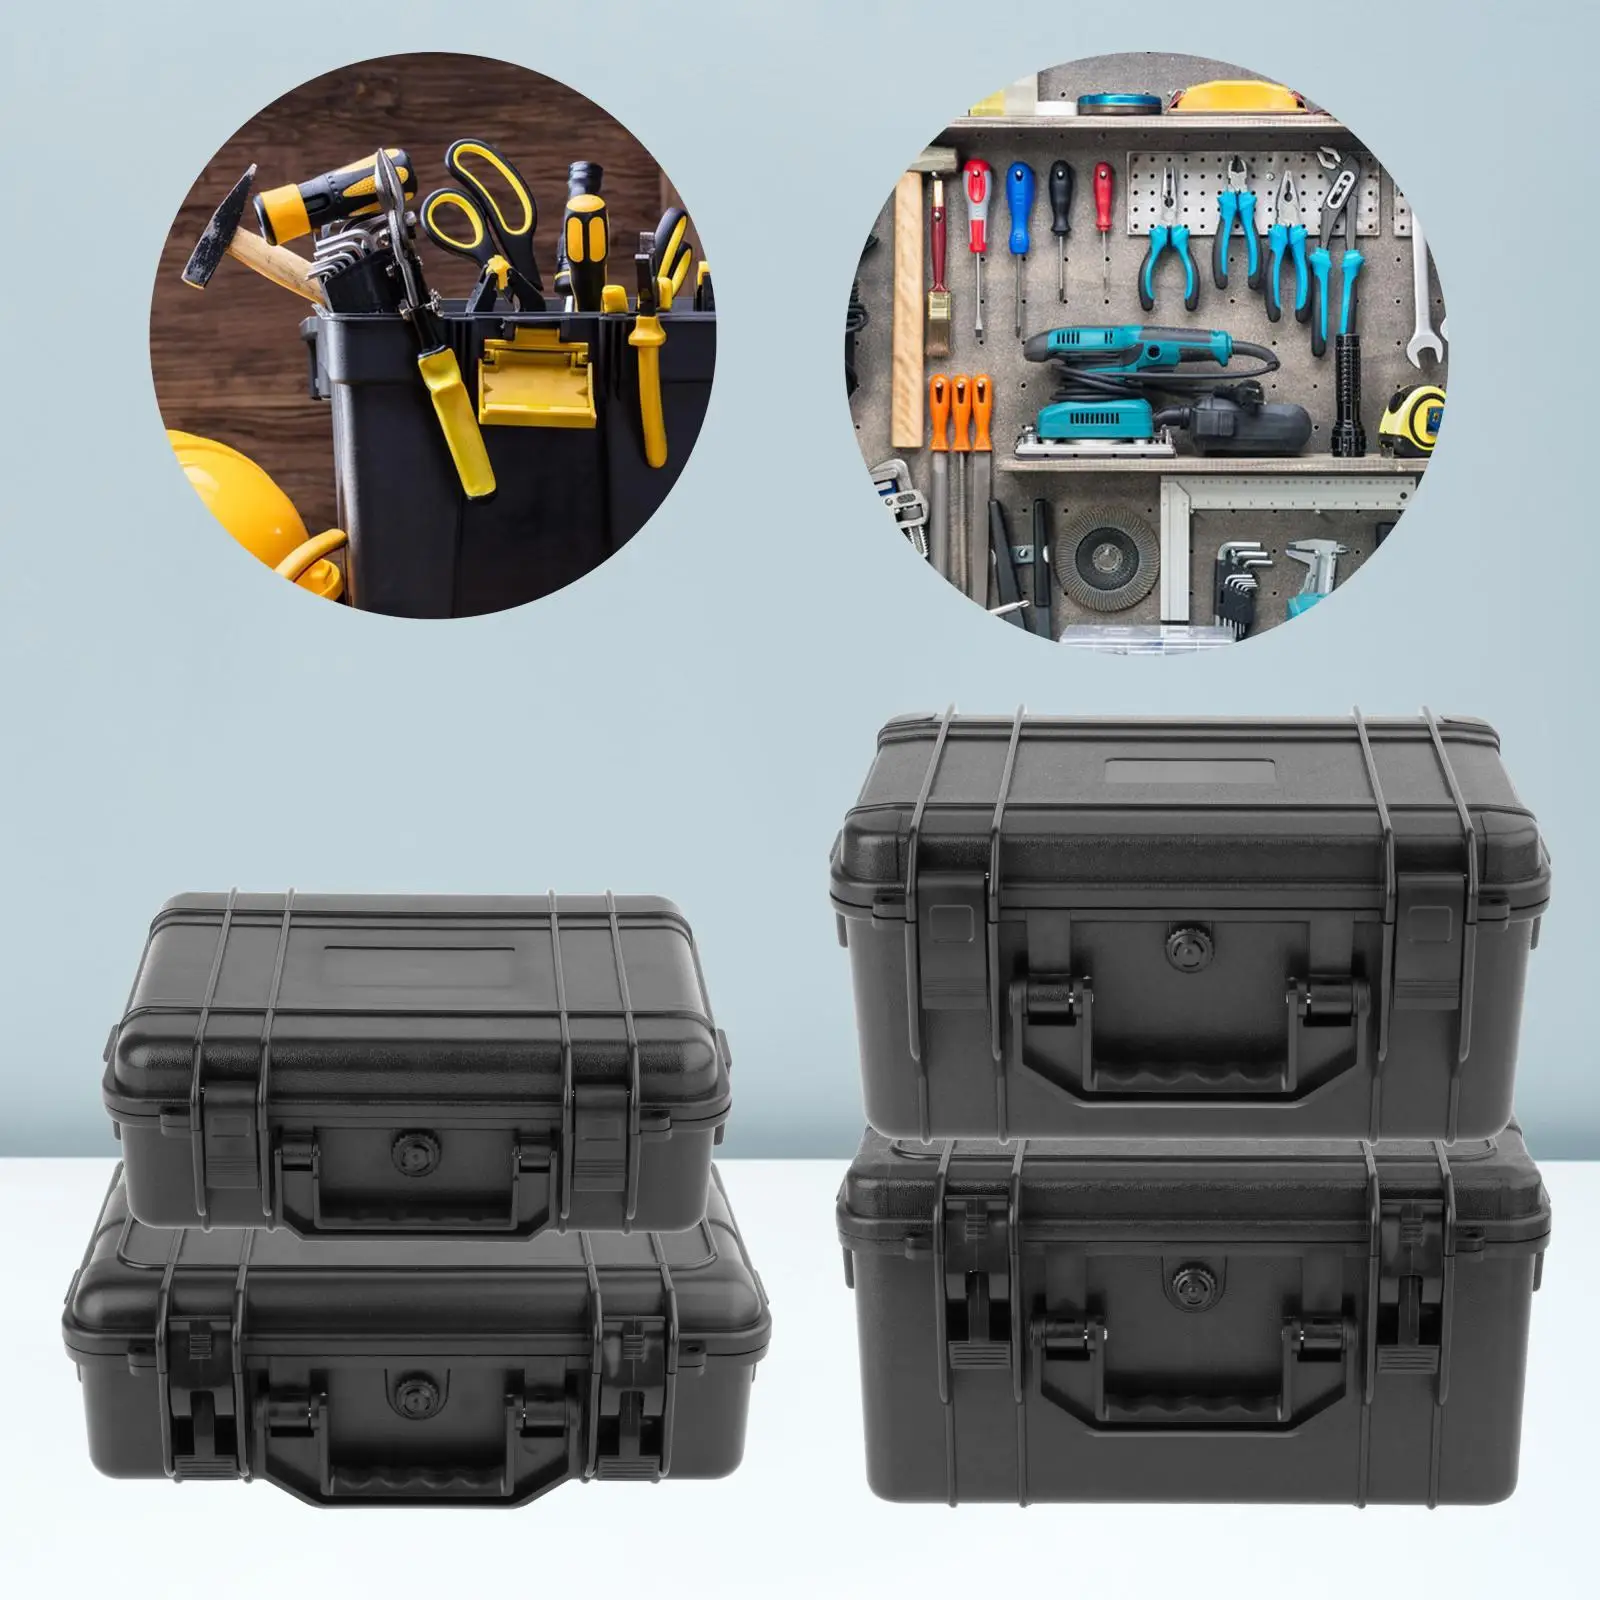 Tool Storage Box Storage Container Suitcase Sealed Tool Case Protective for Cameras Screwdriver Tools Parts Tools Accessories